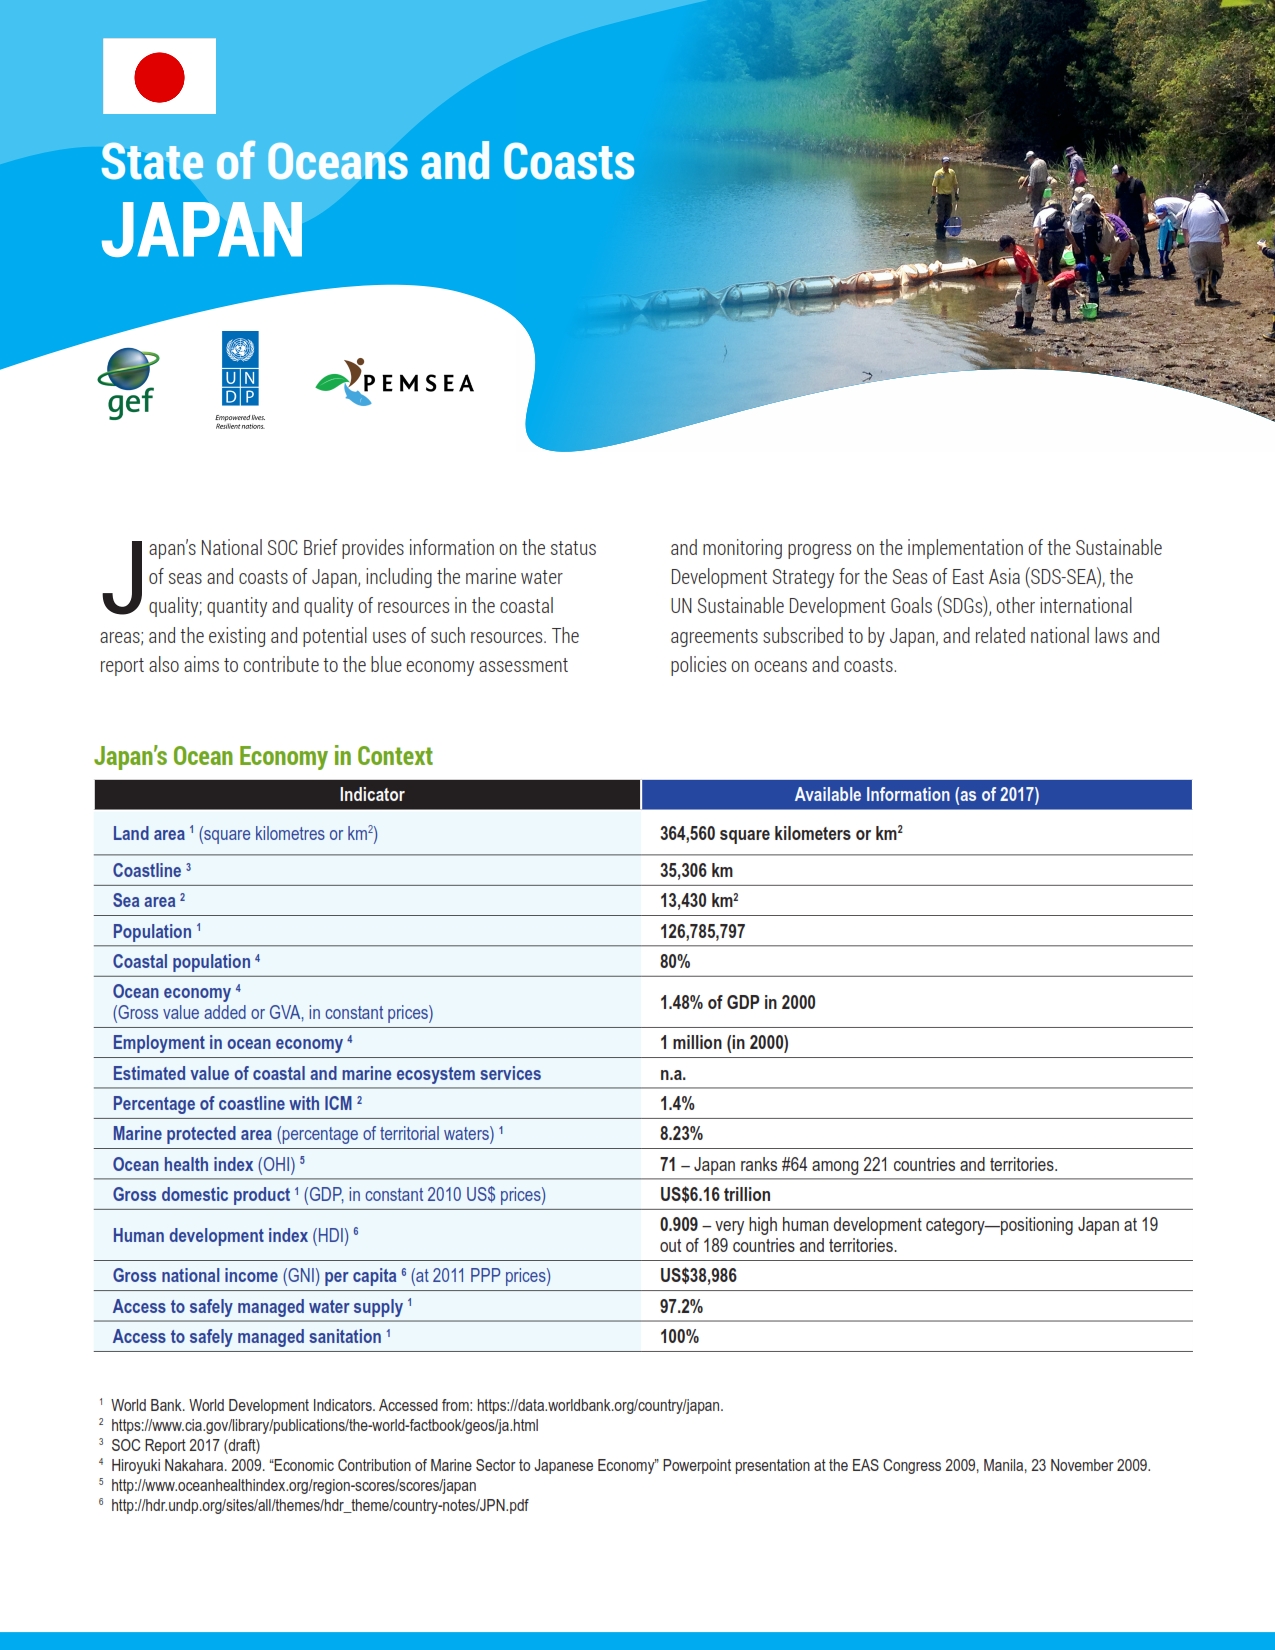 State of Oceans and Coasts of Japan